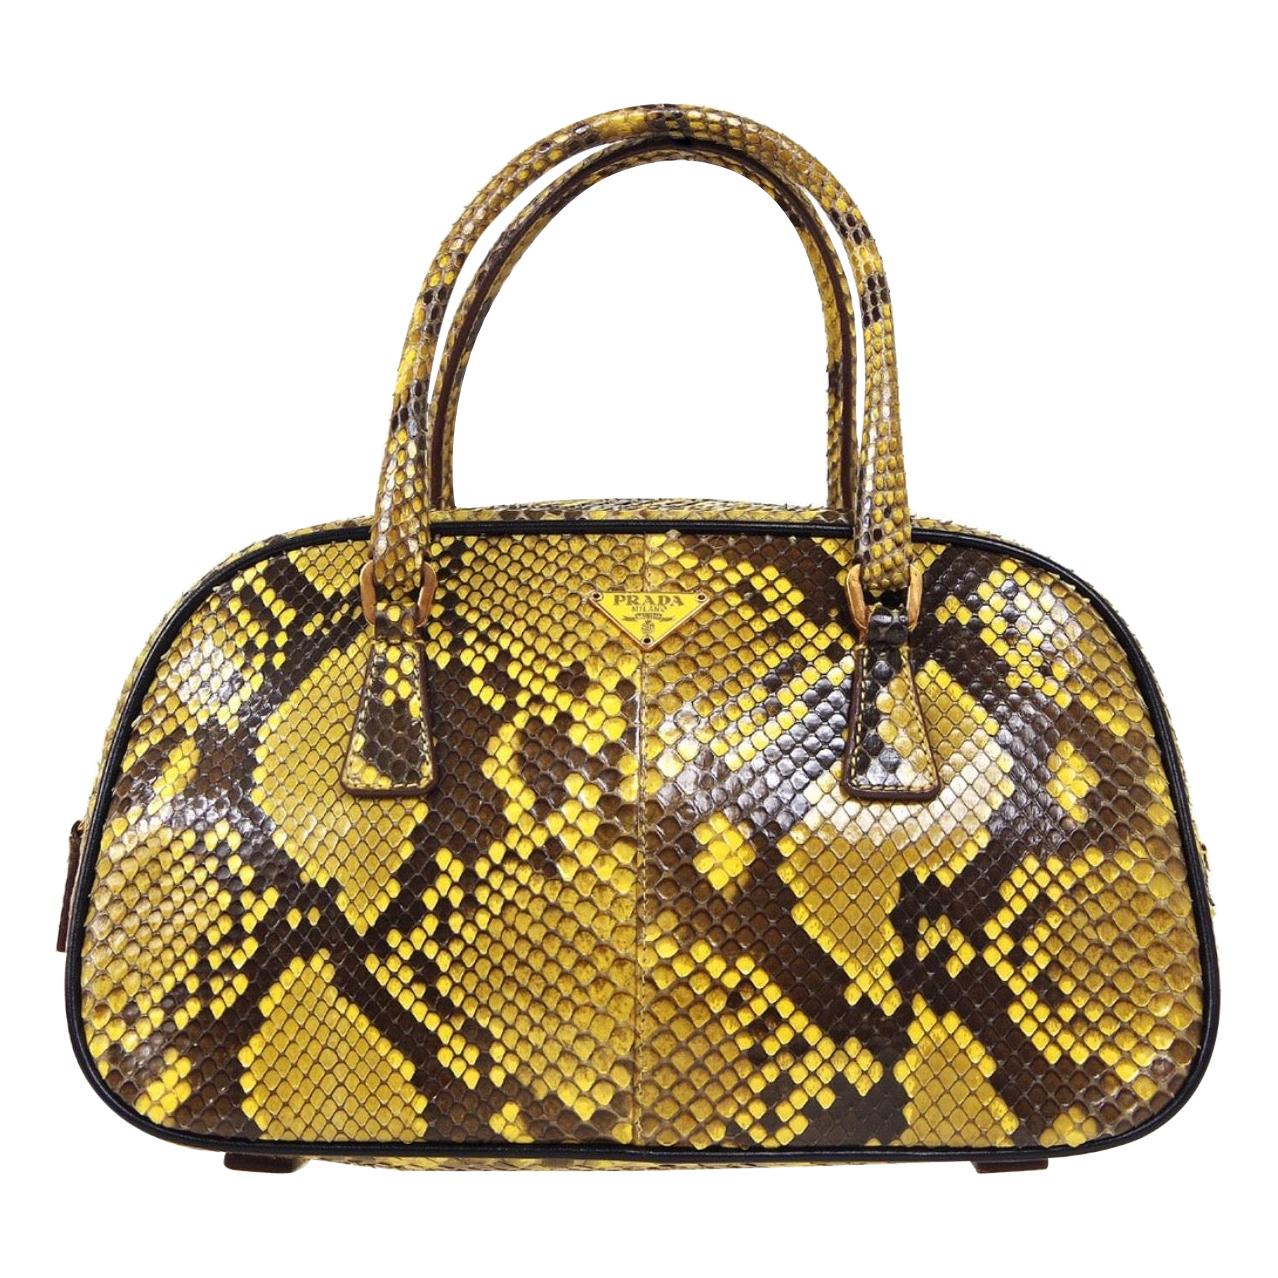 The Less Expensive Exotic Skin For Bags - Python 